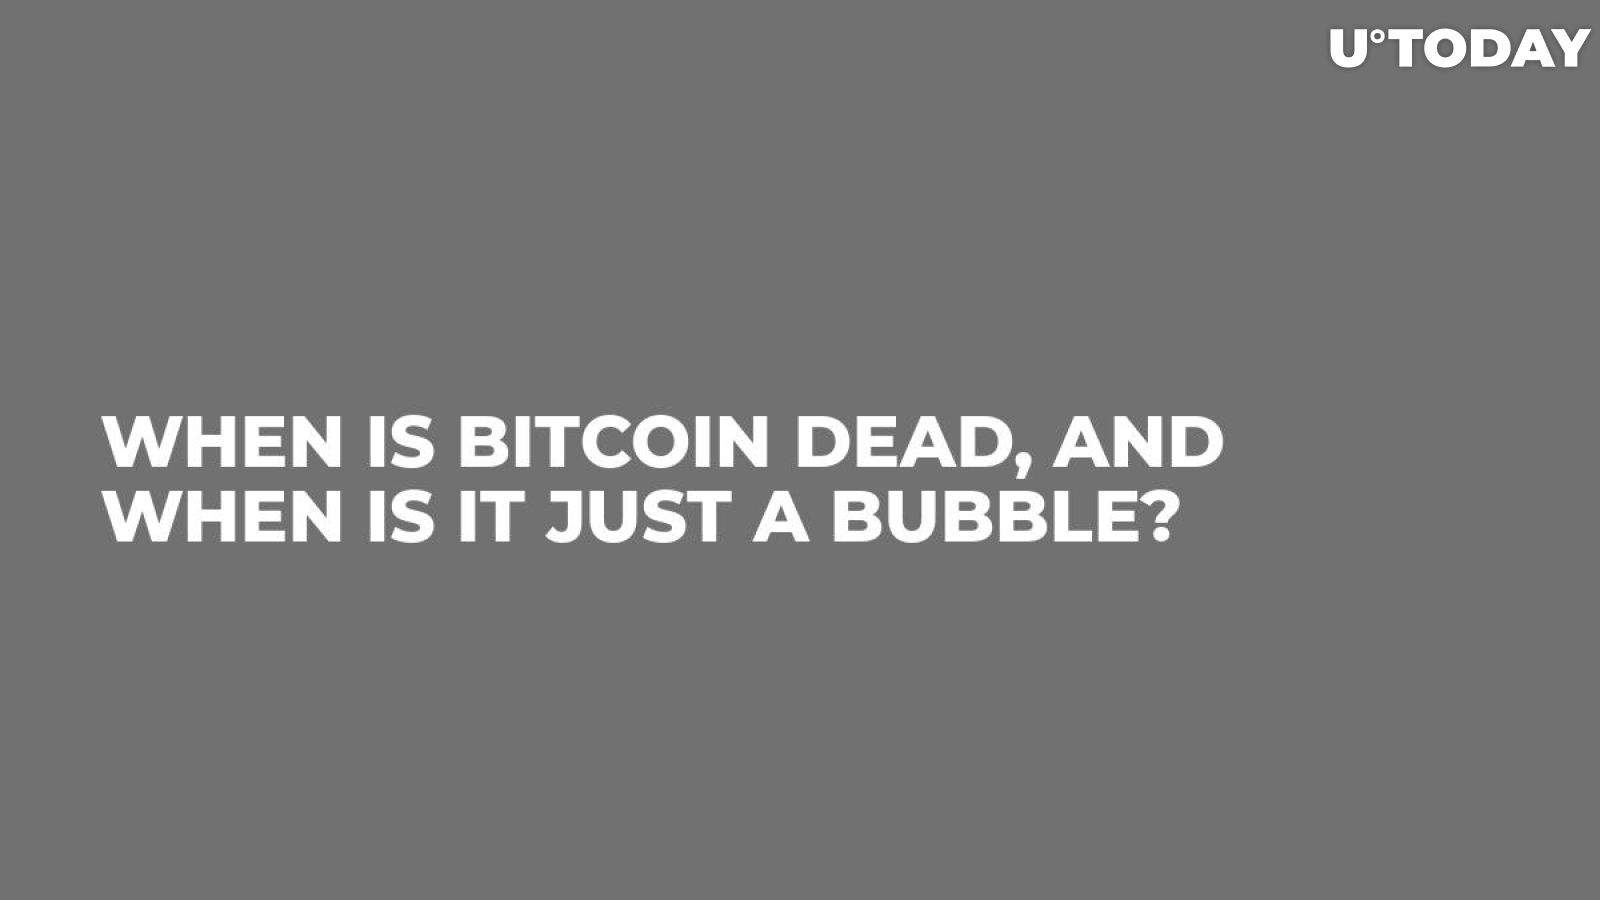 When Is Bitcoin Dead, and When Is It Just a Bubble?